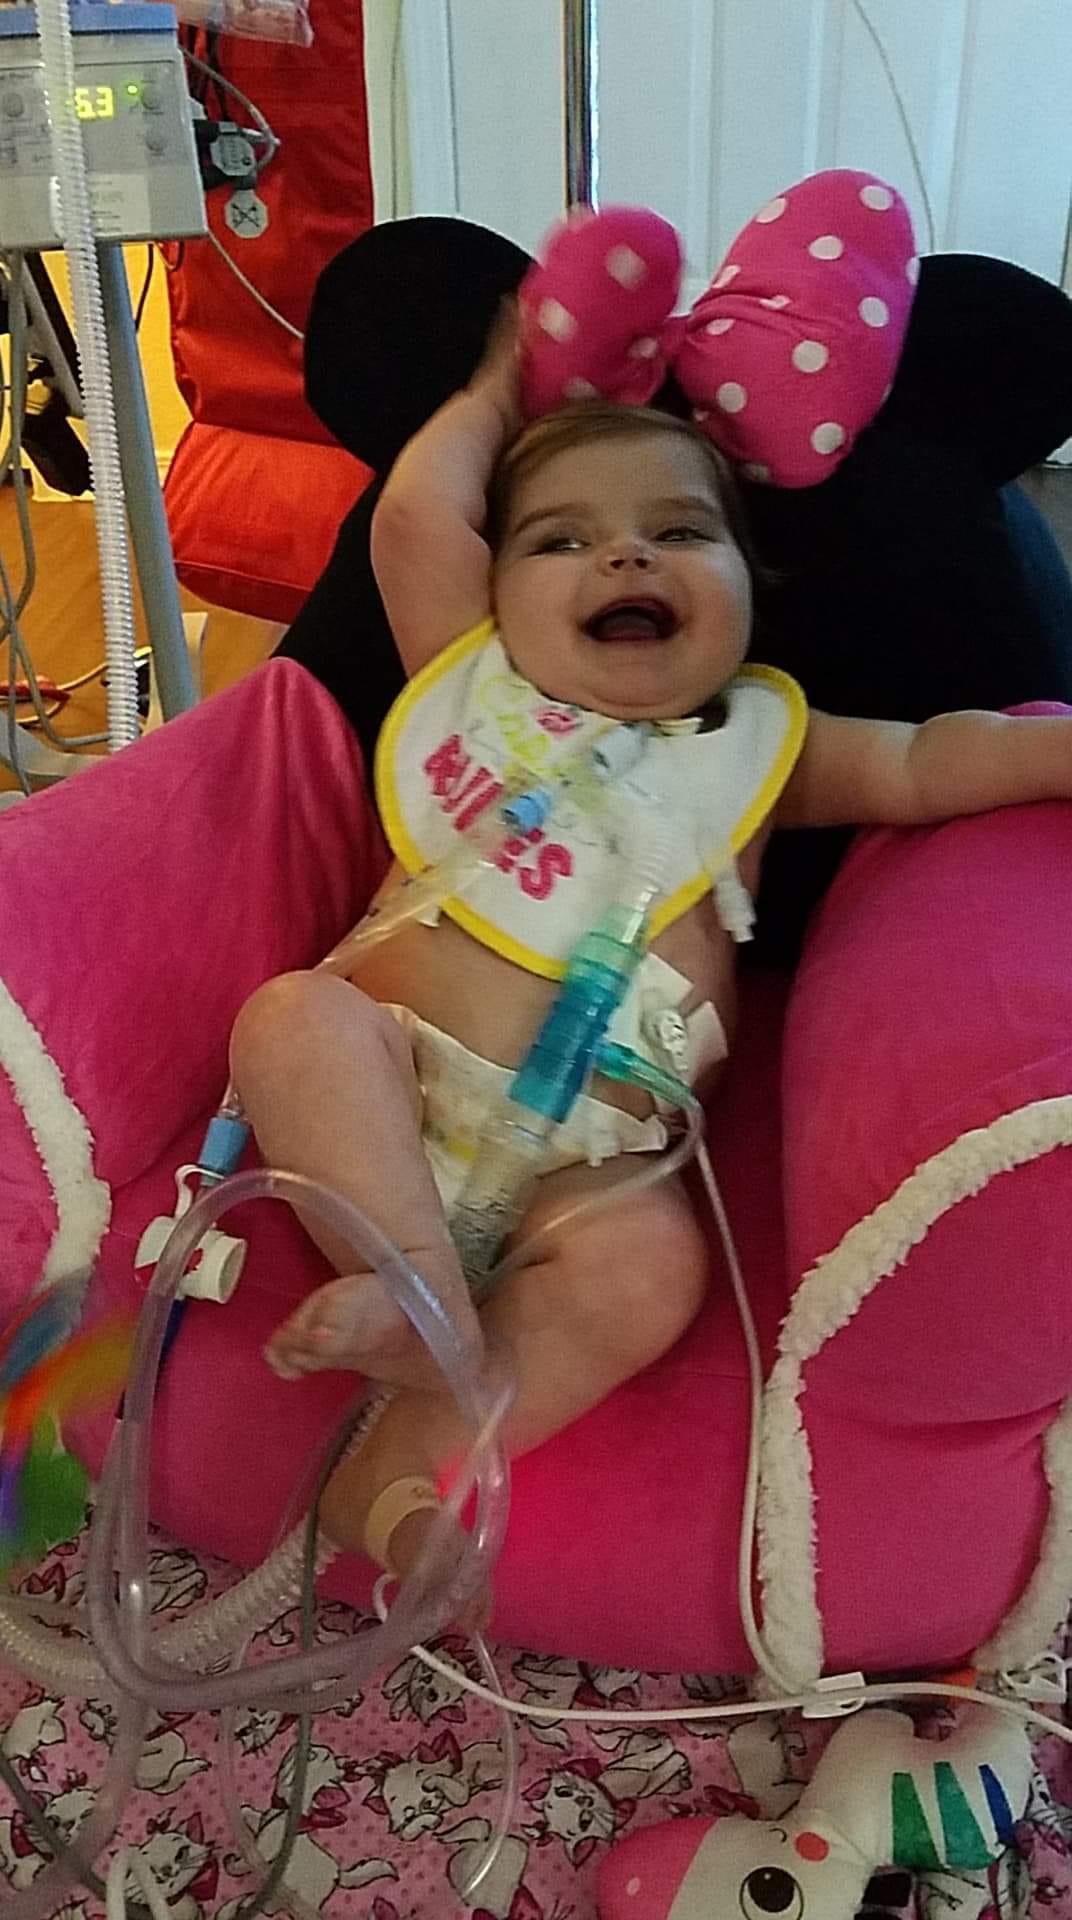 Finally home from another long hospital stay. This was her reaction to sitting in her chair for the first time in a while. lol